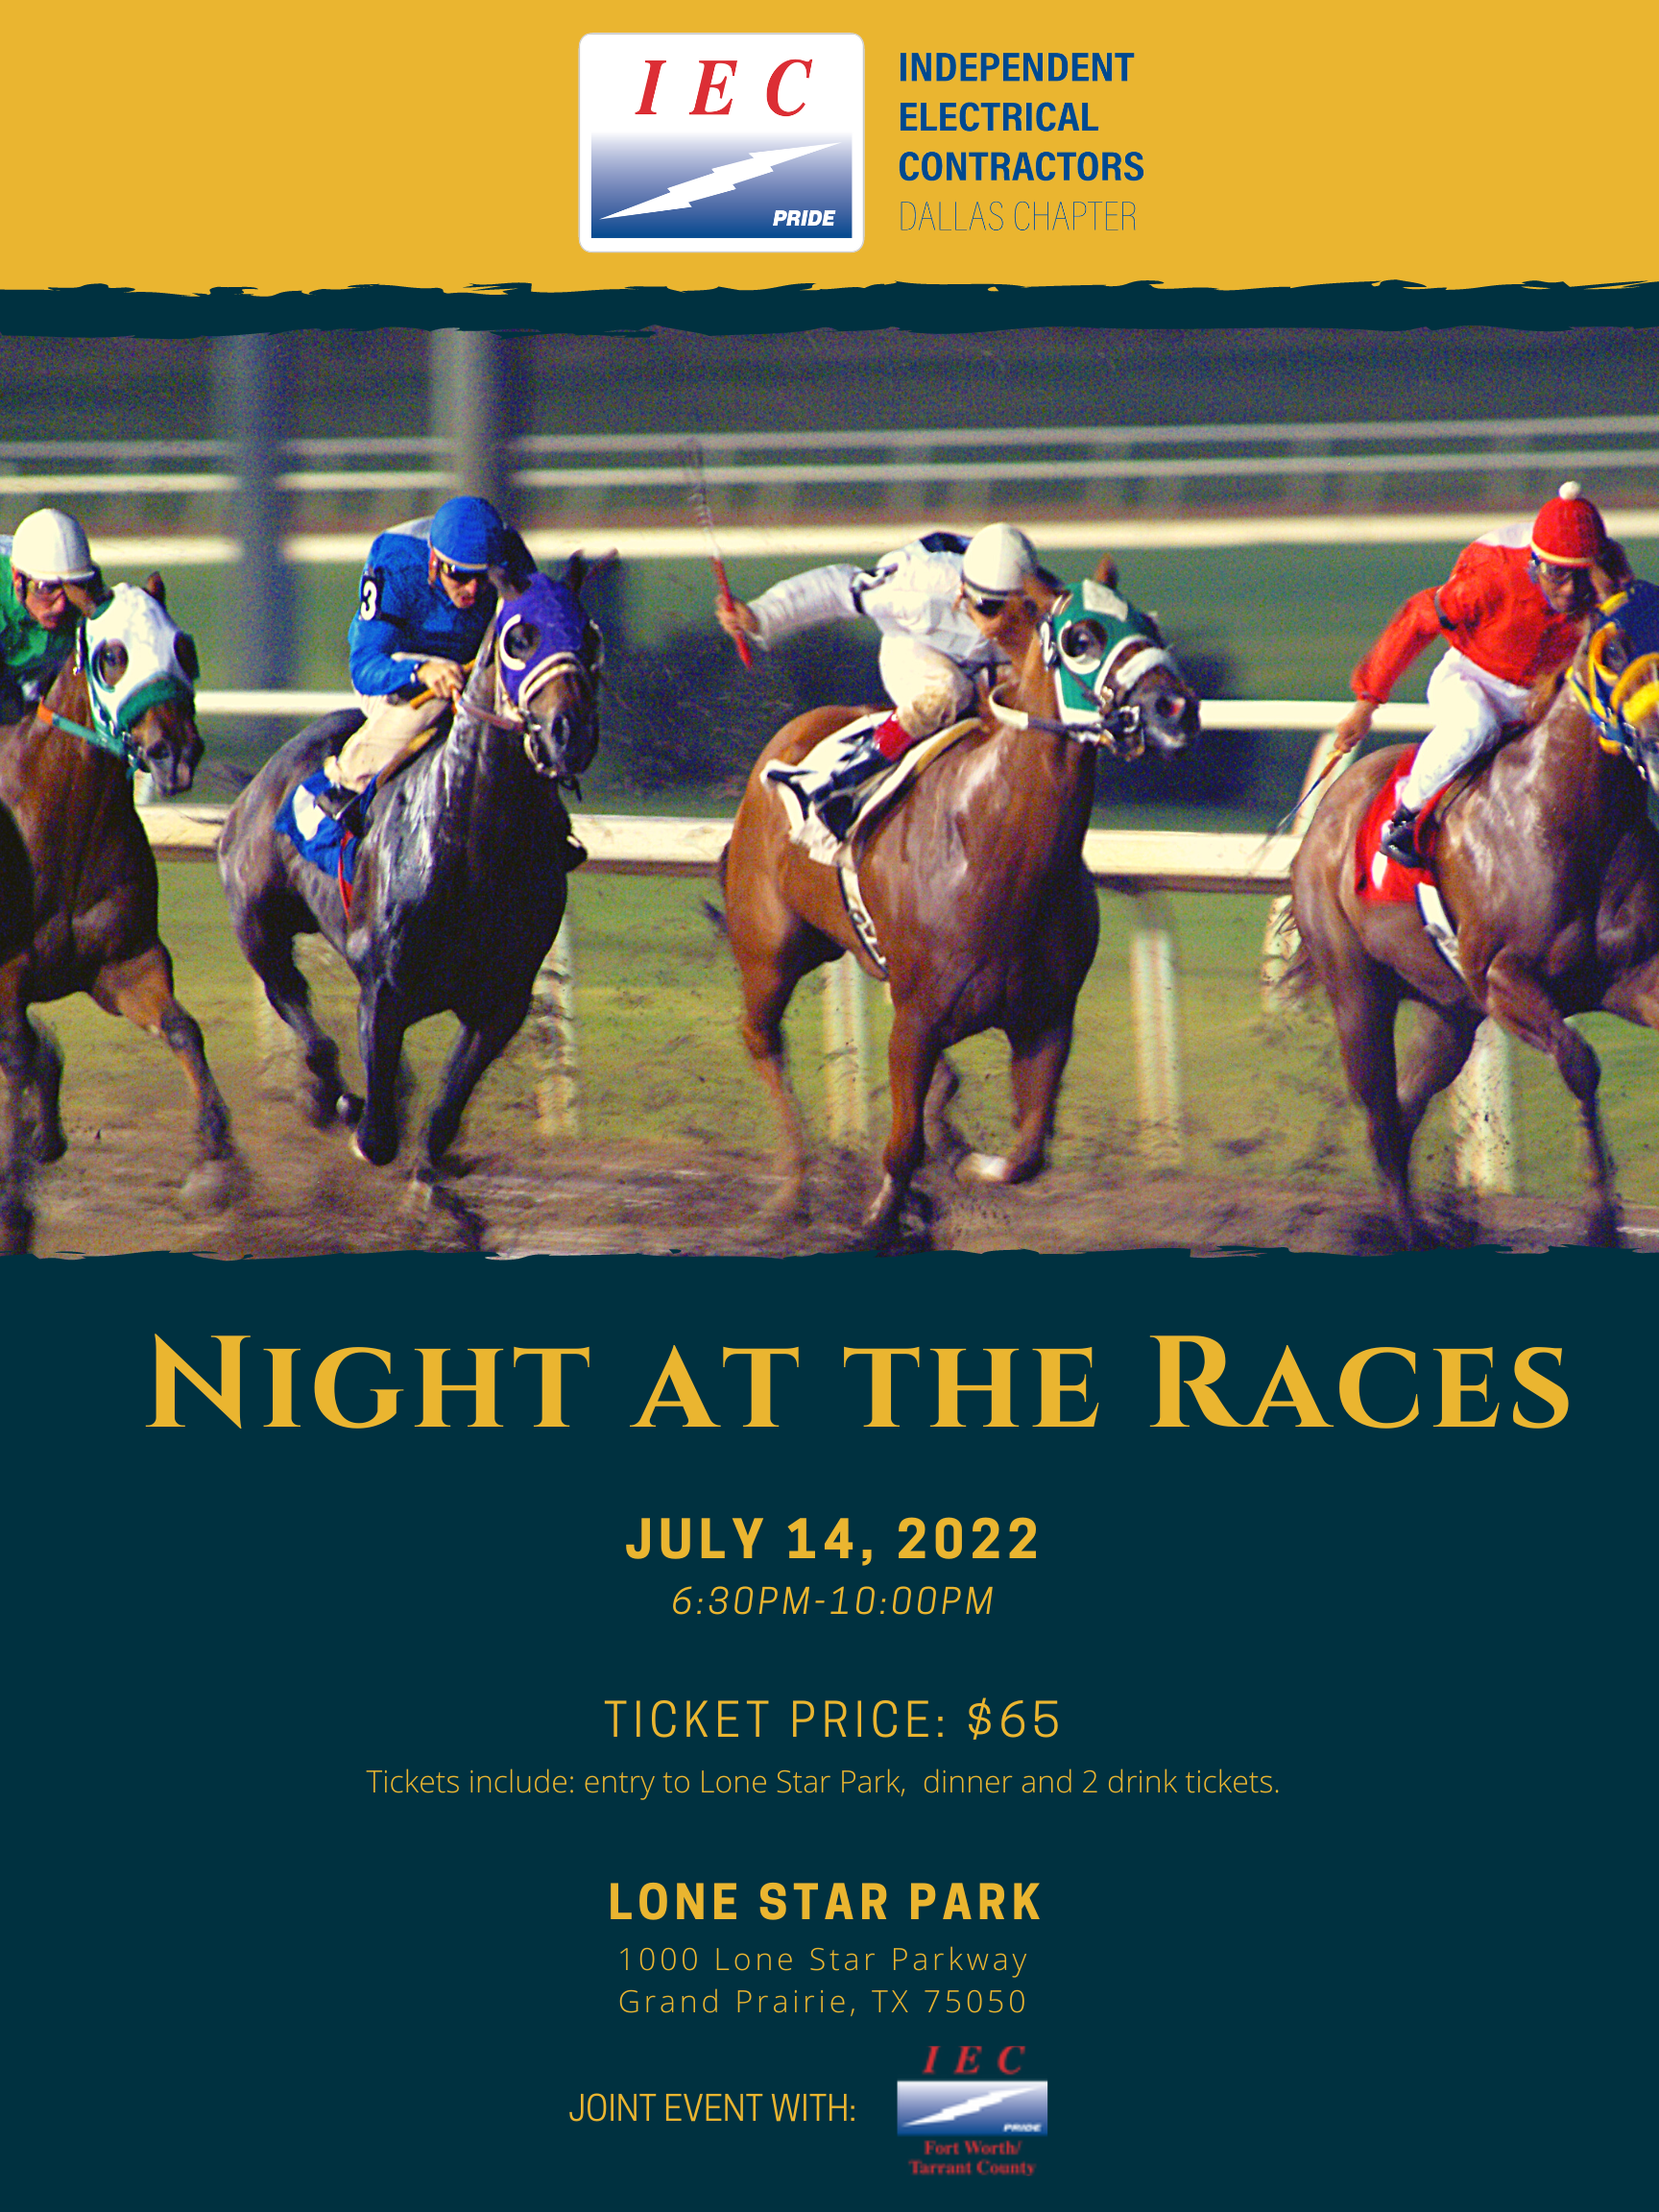 Night at the Races